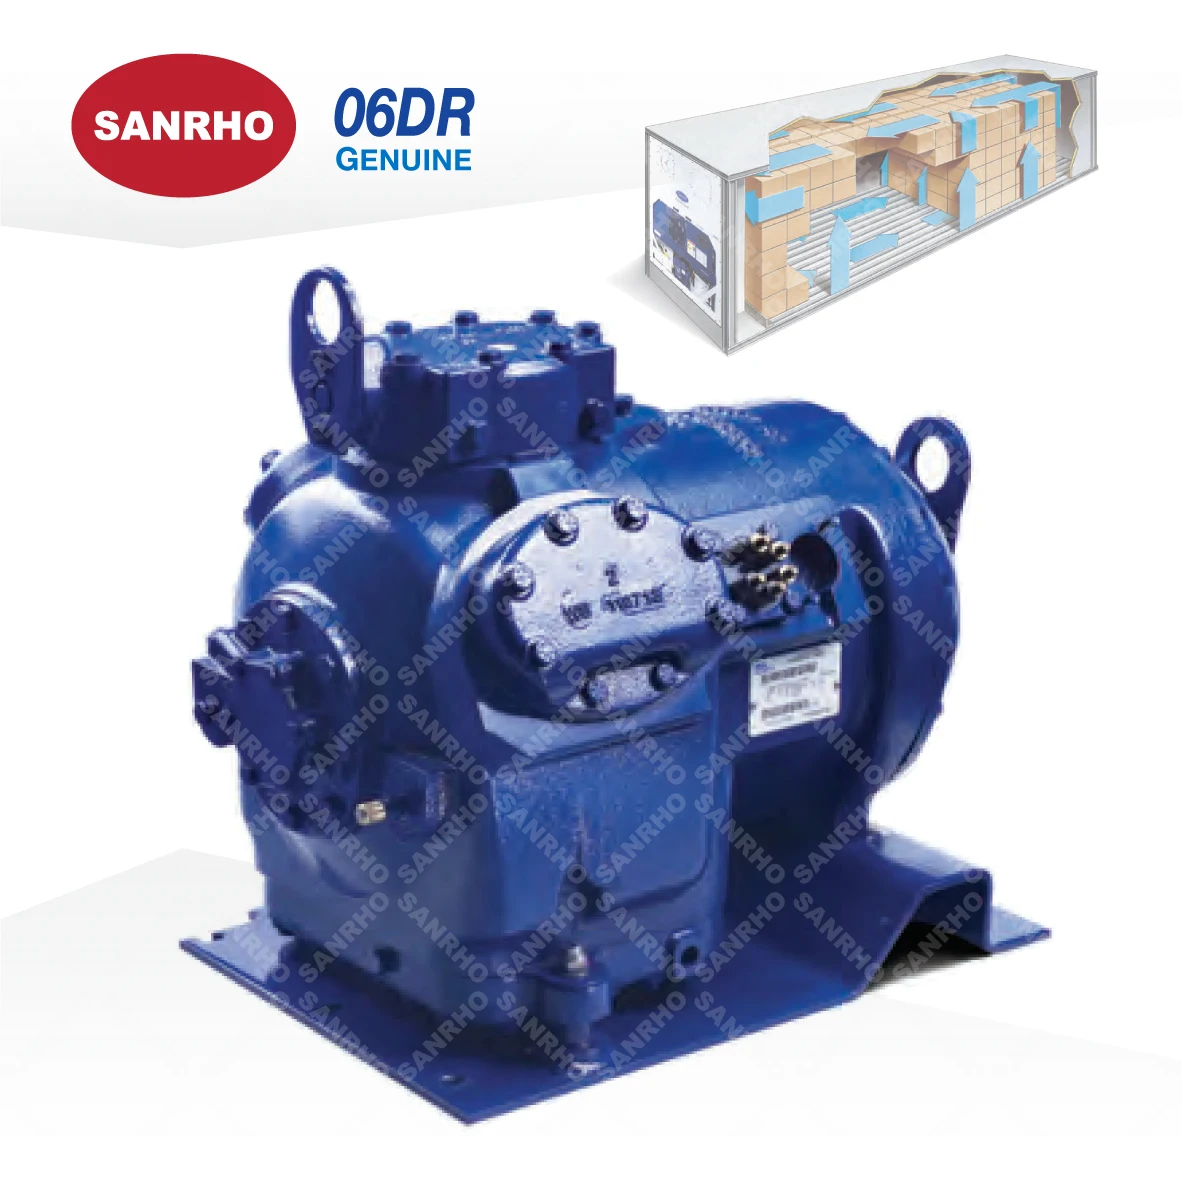 New 18 rm2 18 sv Carrier Transicold Thinline Reefer Container Compressor 06dr241 Buy Reefer Container Compressor 18 rm2 Carrier Compressor Product On Alibaba Com